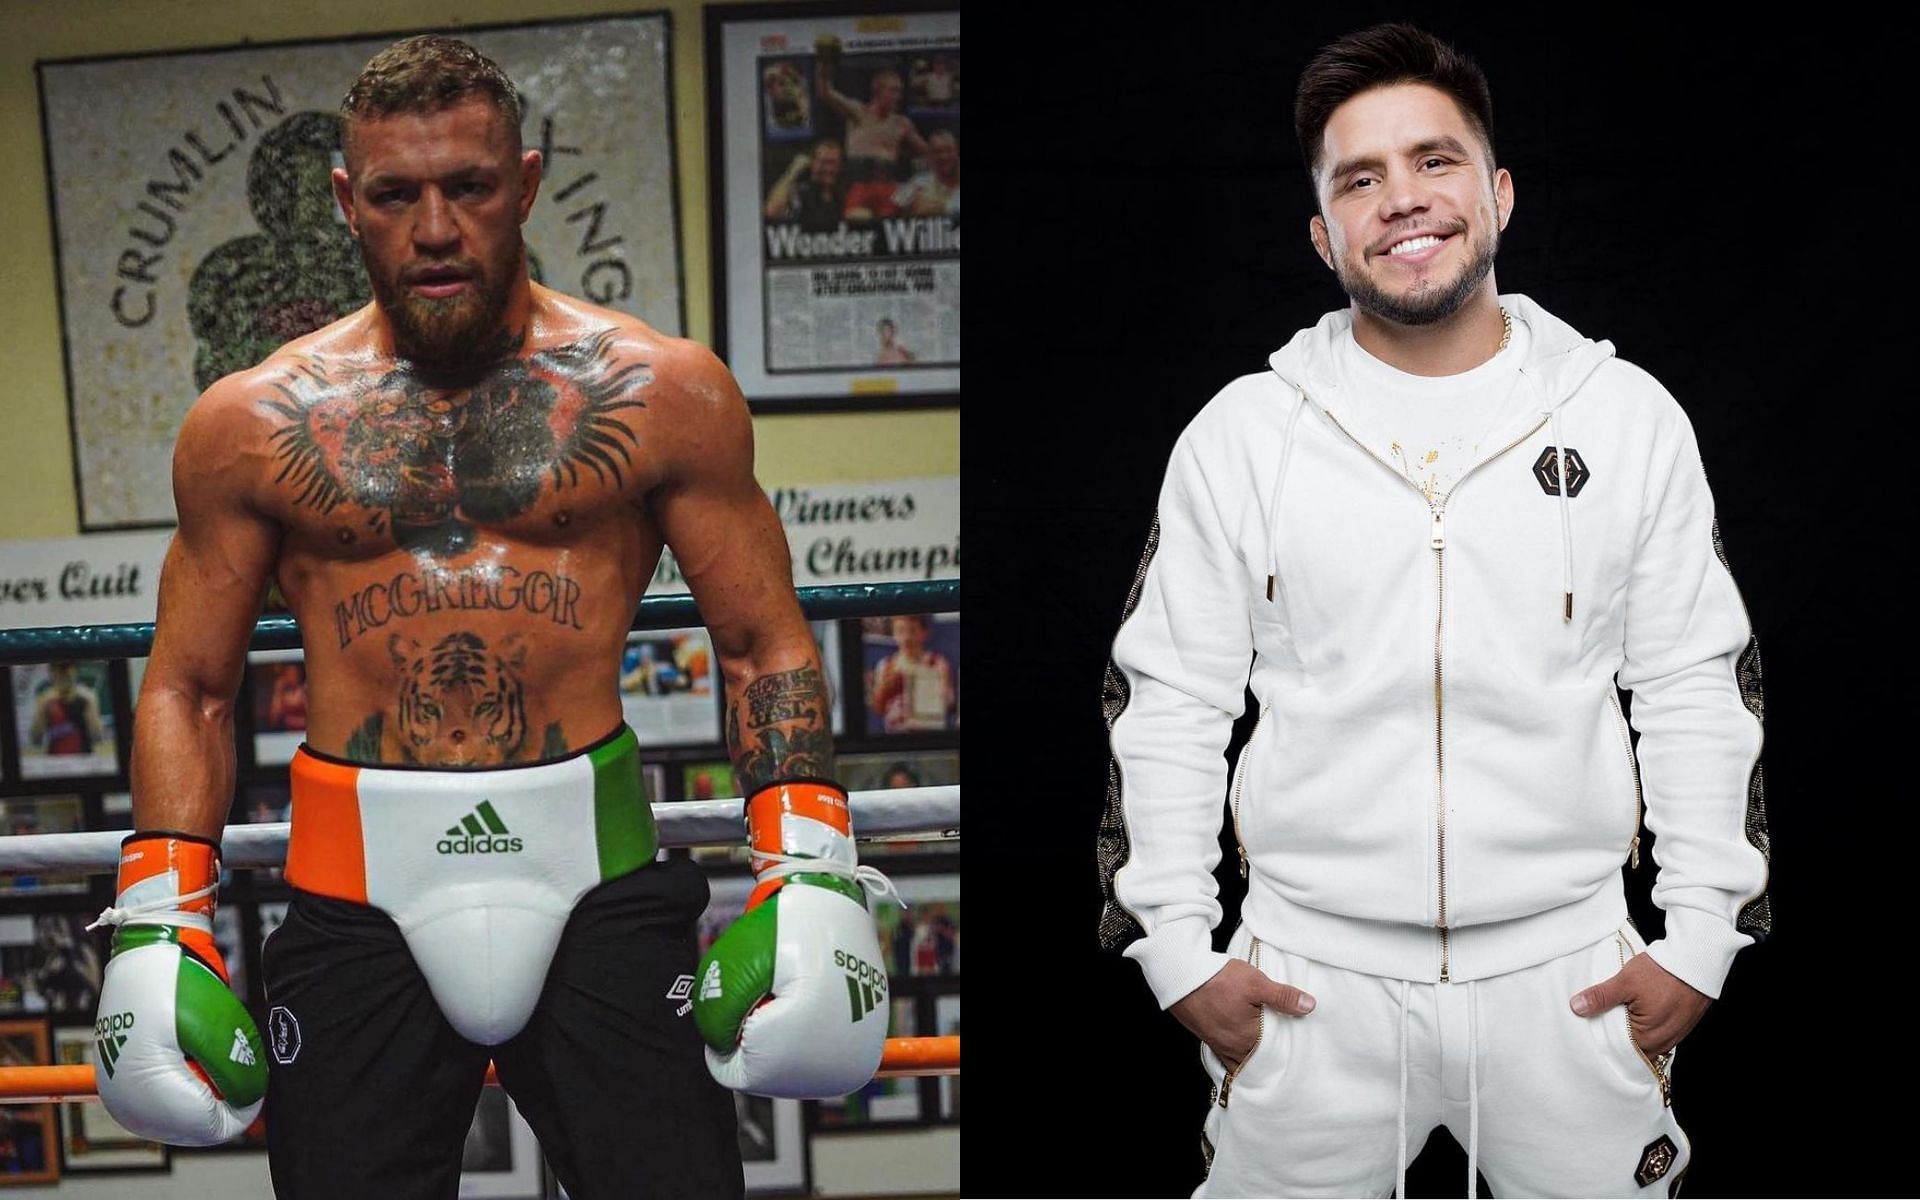 Conor McGregor (left) and Henry Cejudo (right) [Images via @thenotoriousmma @henry_cejudo on Instagram]